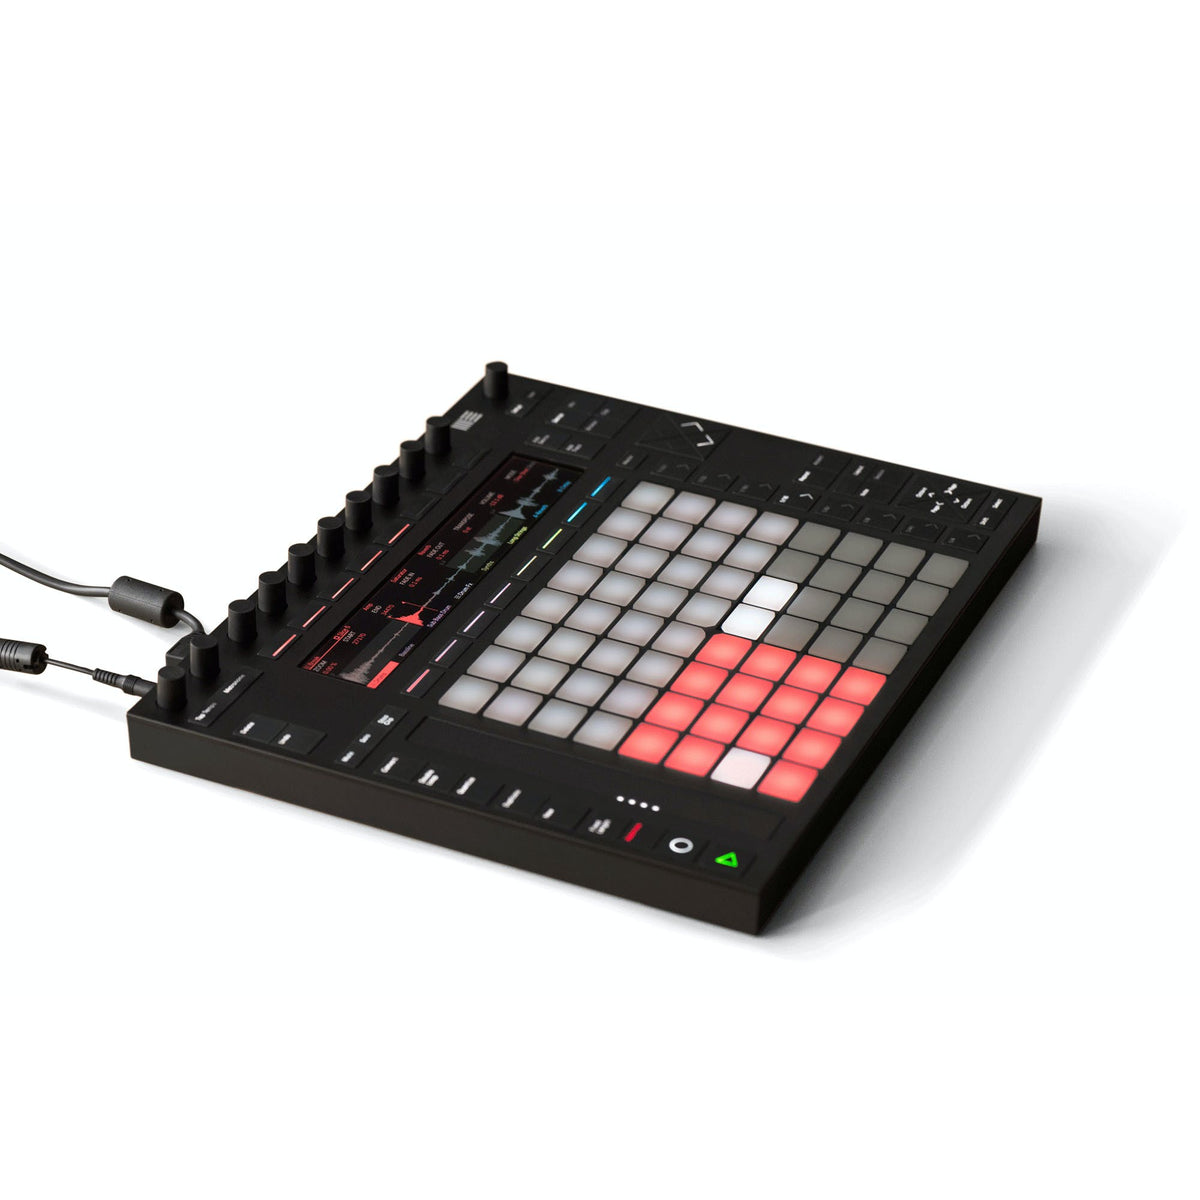 Ableton Push 2 Sound Controller, Interface for Education